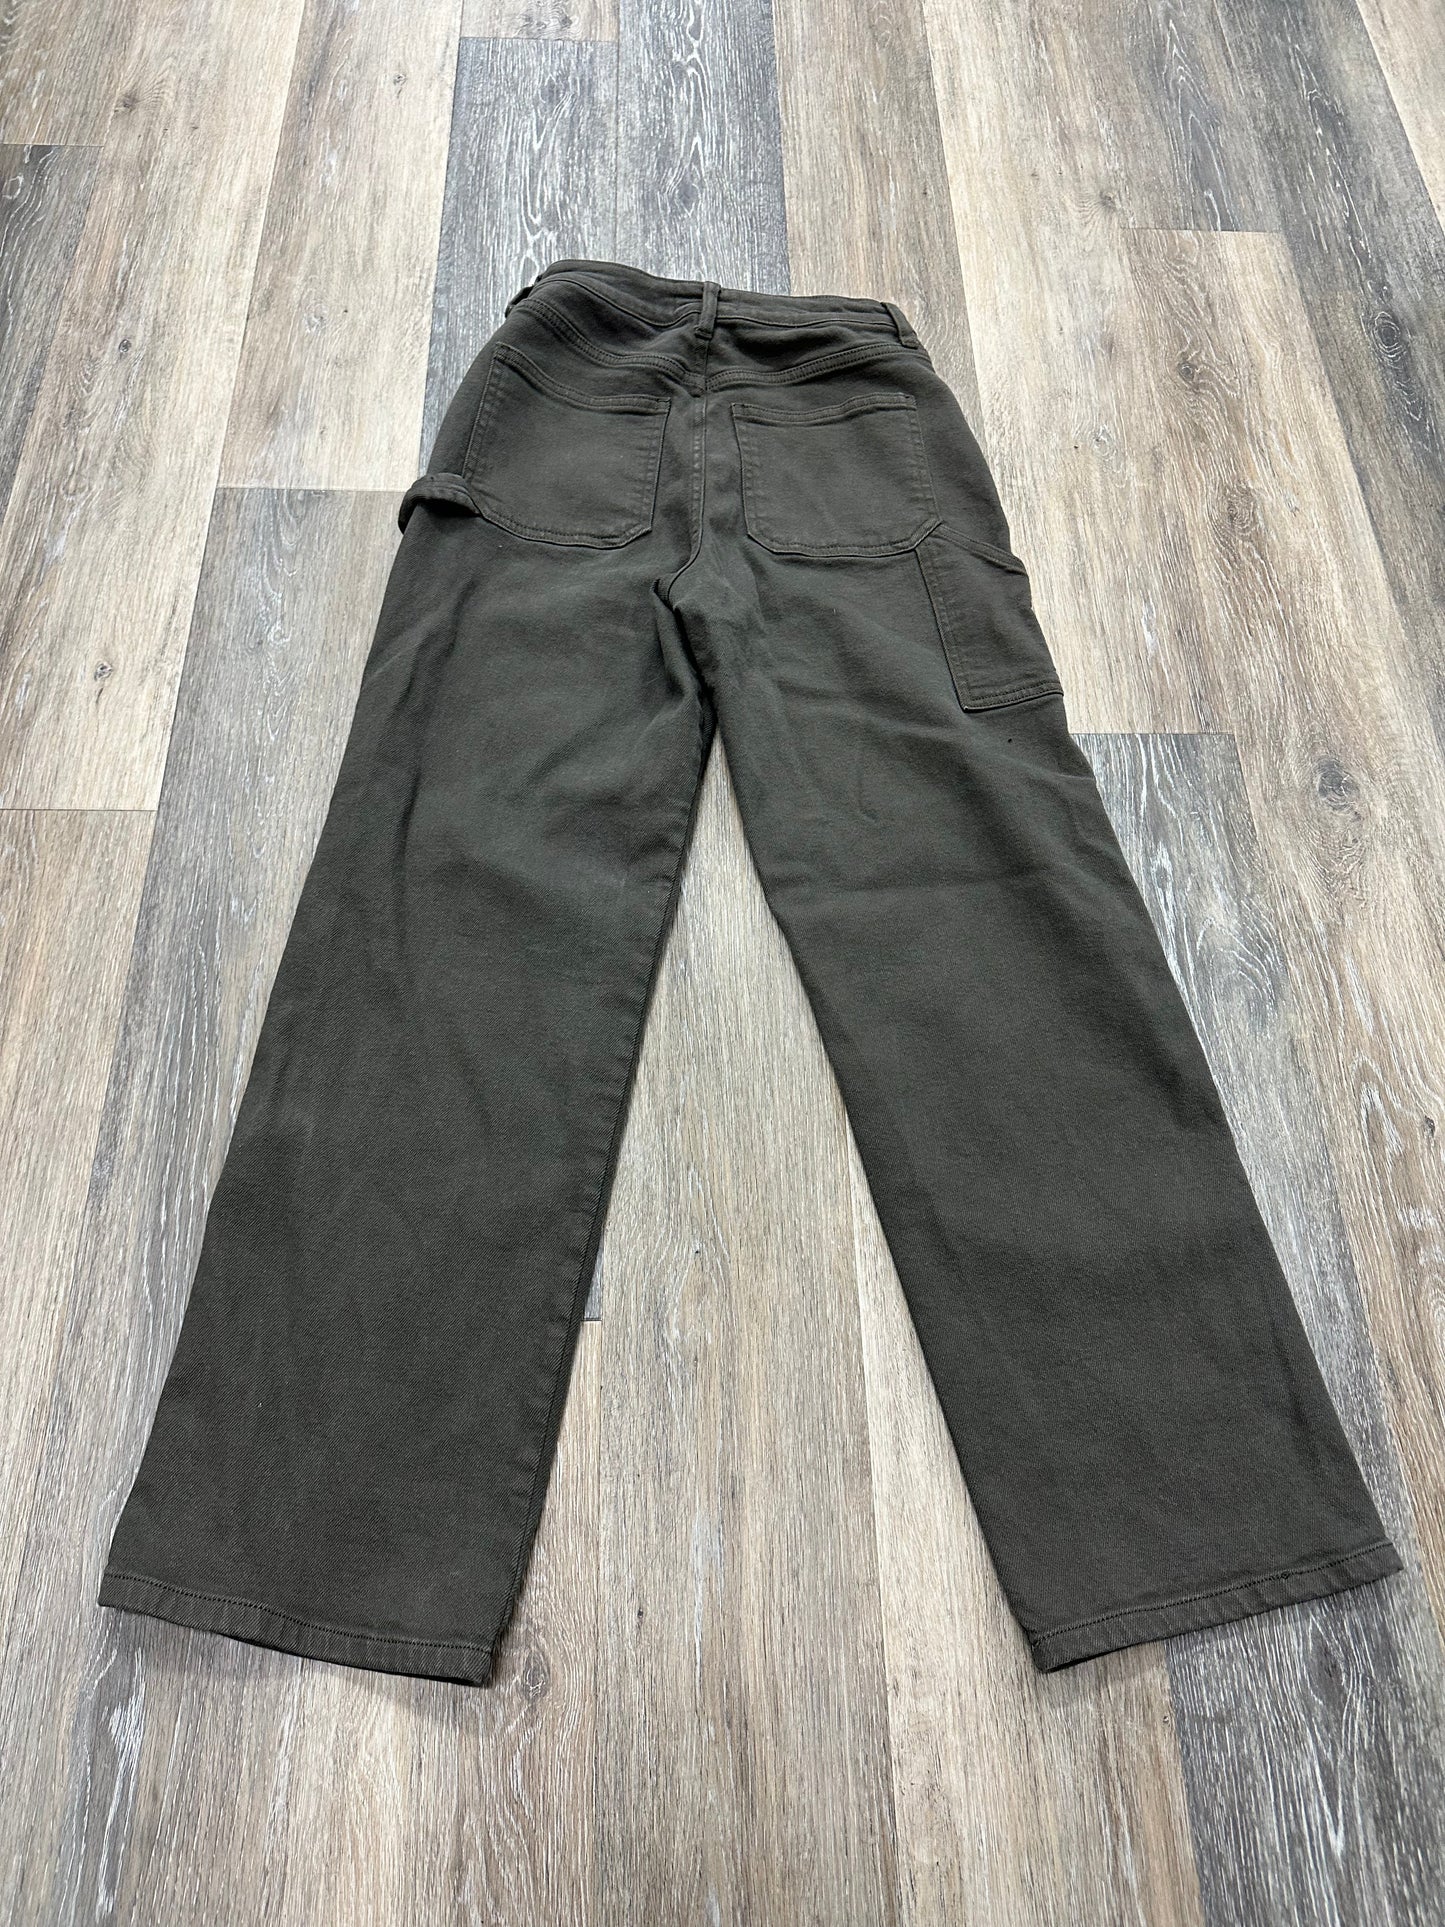 Pants Cargo & Utility By Just Black  Size: 2